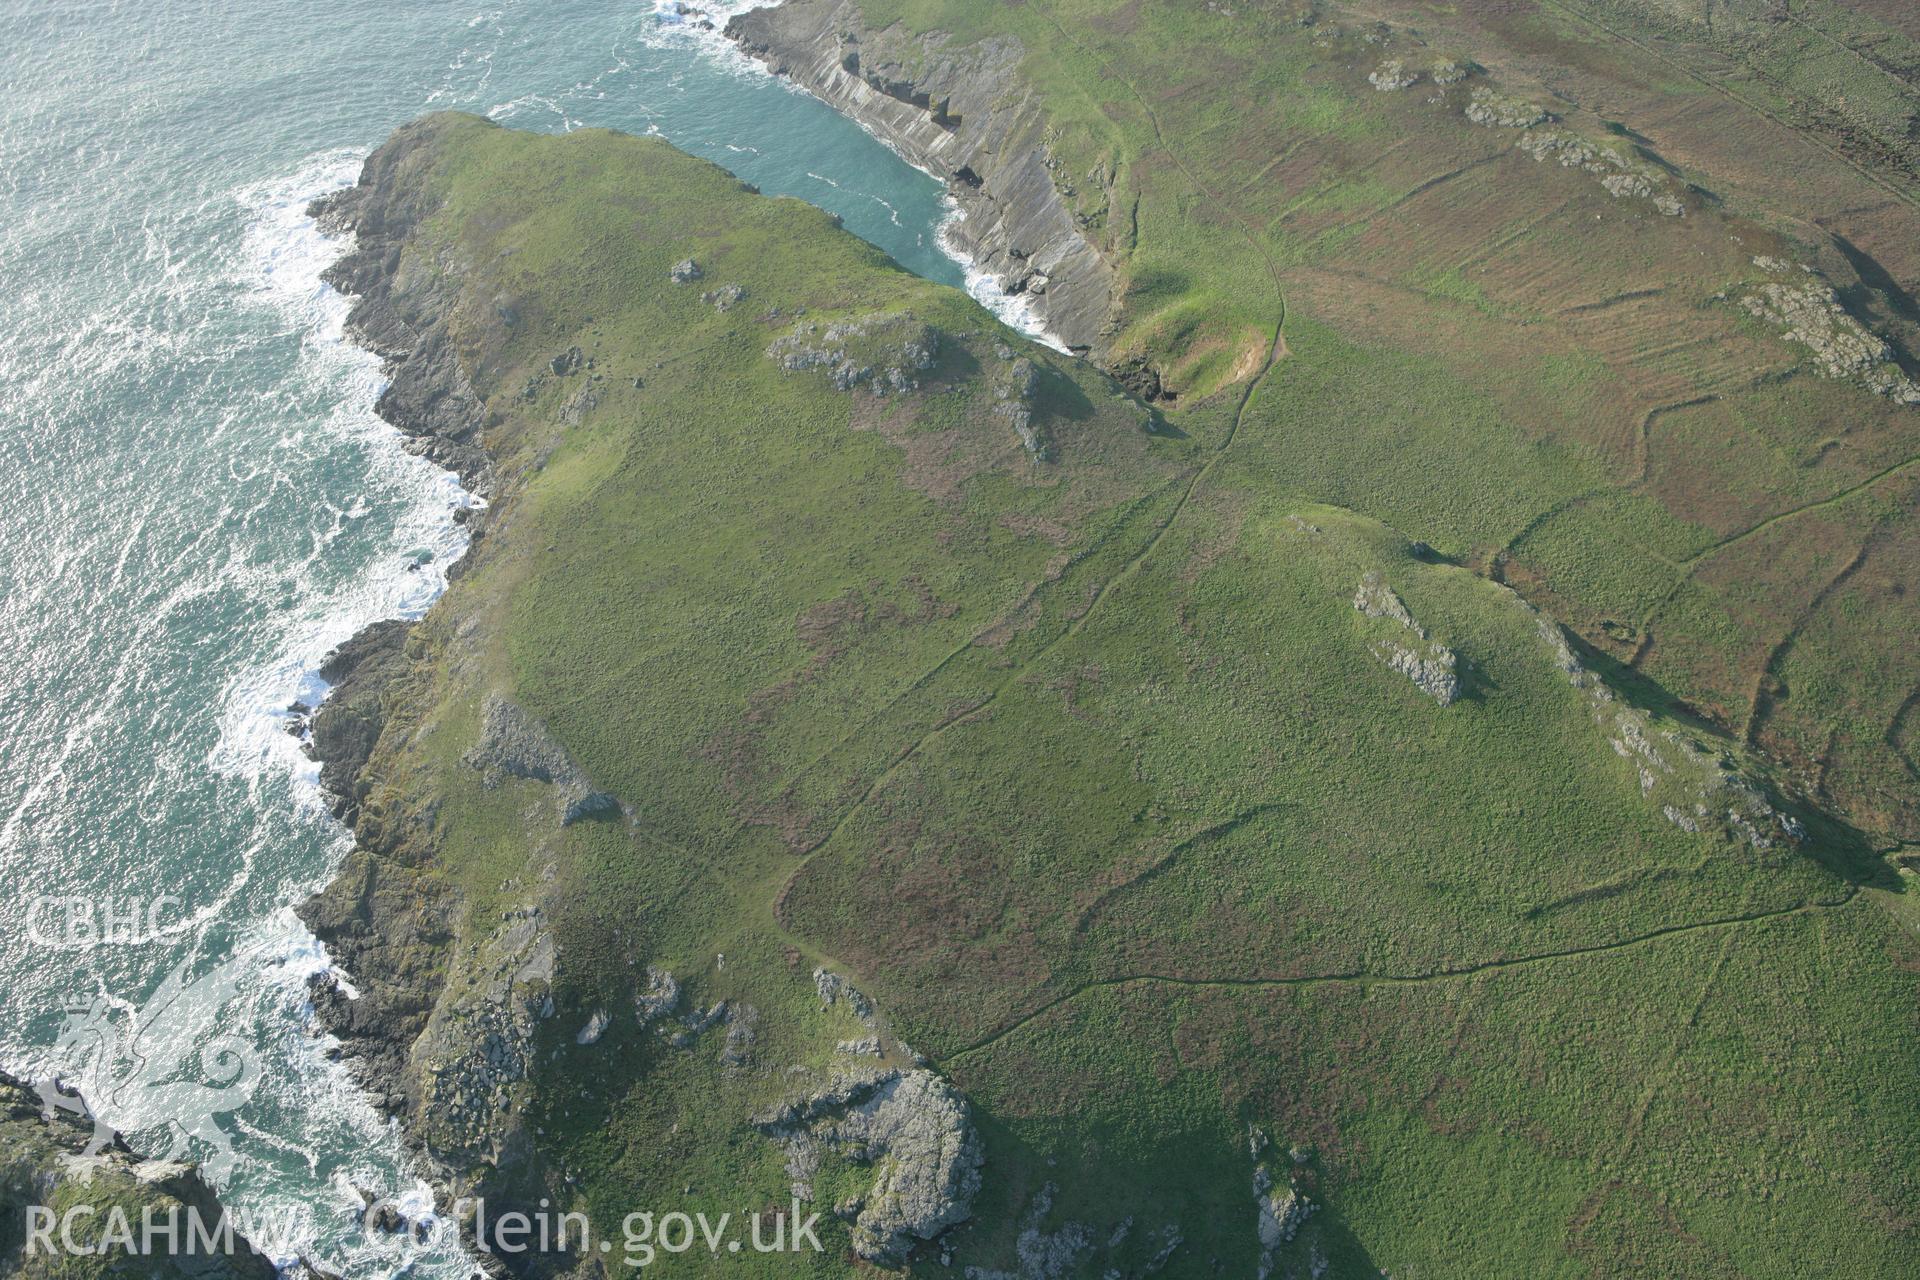 RCAHMW colour oblique photograph of Skomer Island, The Wick co-axial field systems, view from south-east. Taken by Toby Driver on 04/03/2008.